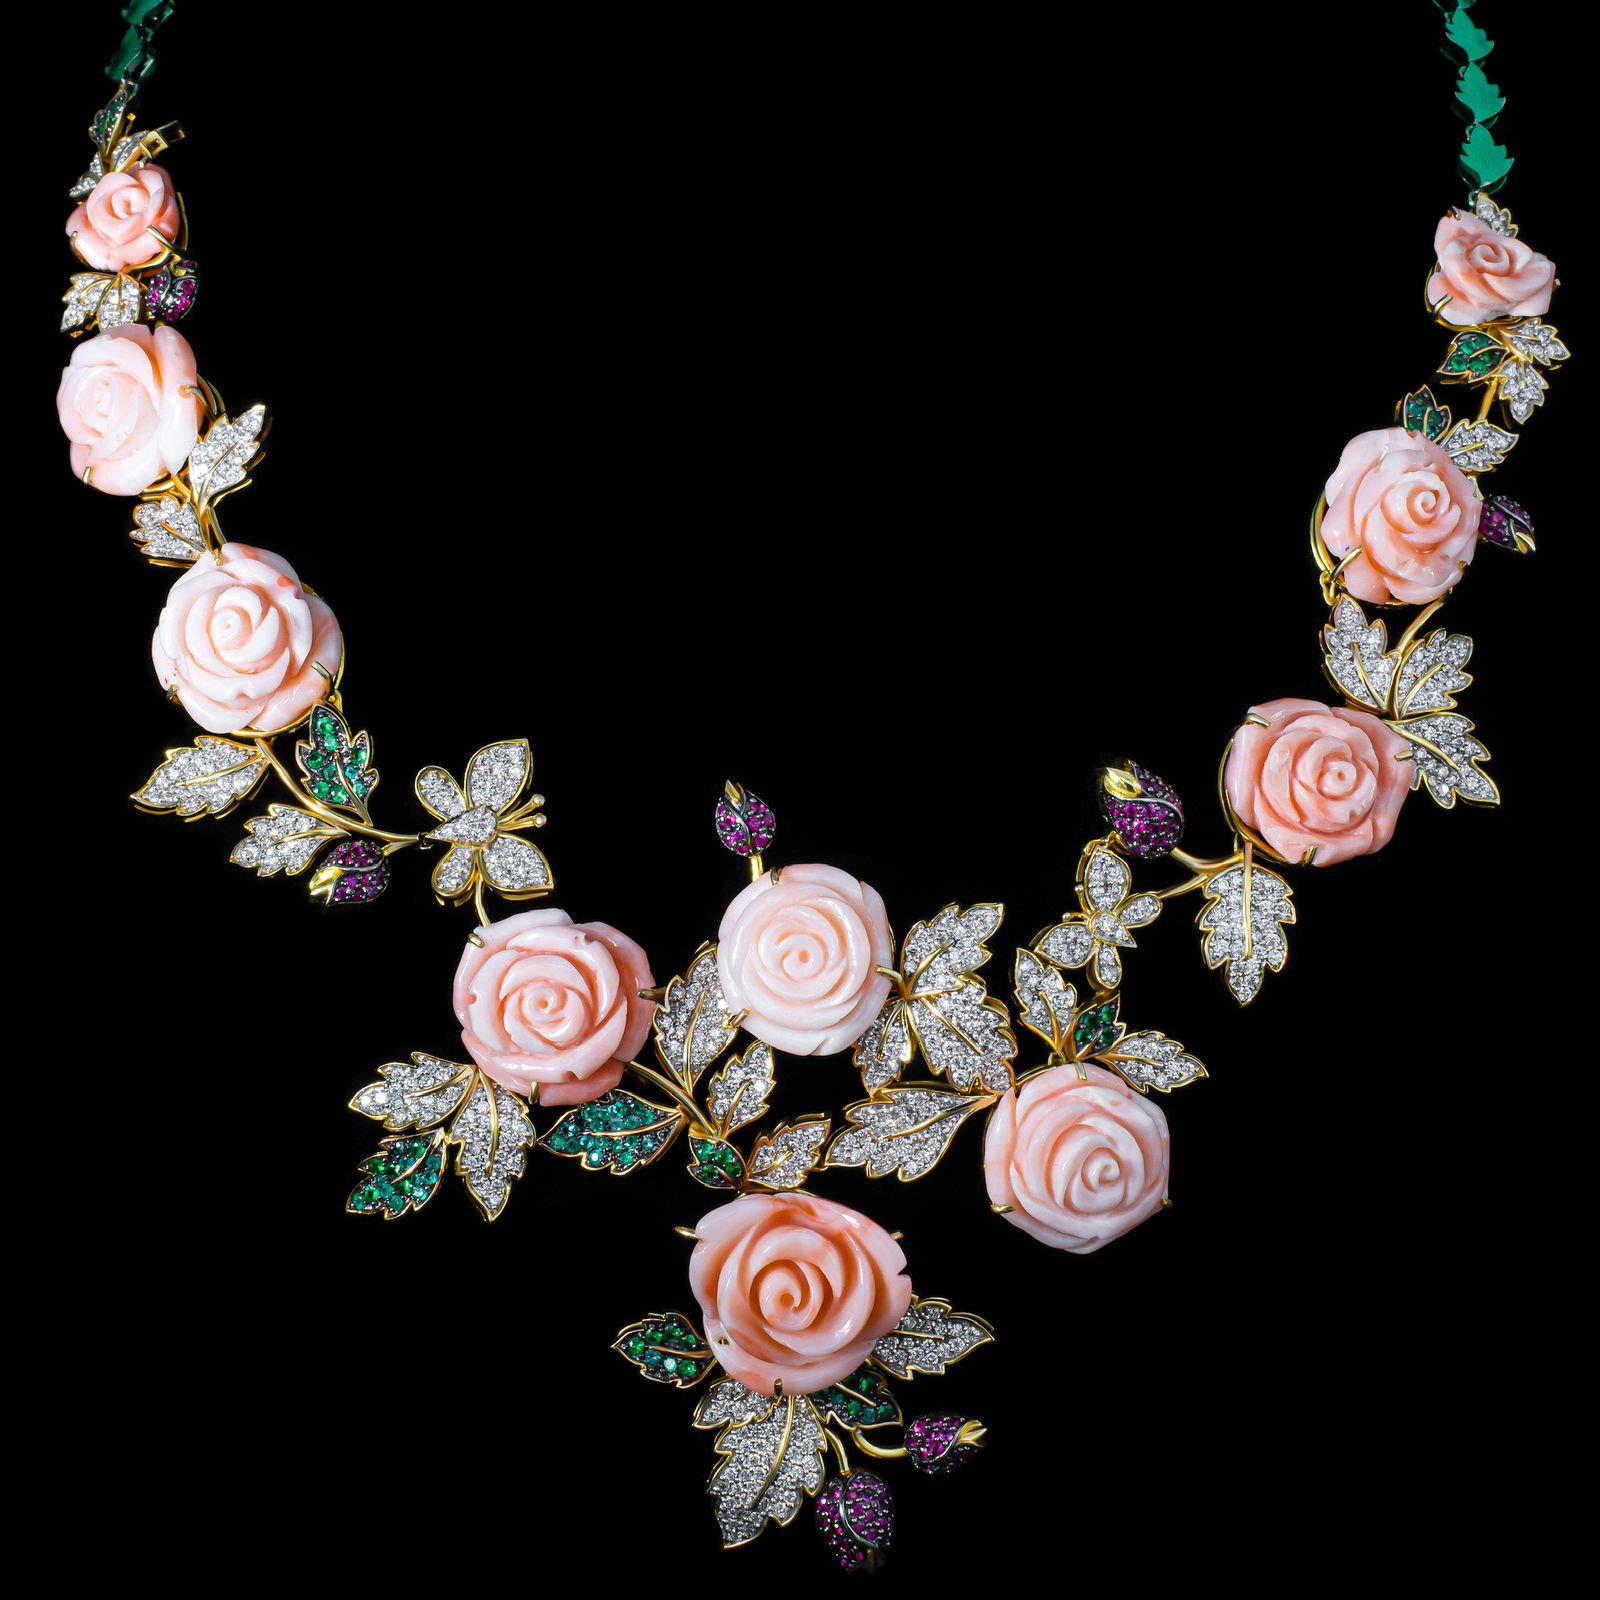 The Following Item we are offering is a Rare Important Radiant White Gold Large Fancy Coral, Emerald, Sapphire Diamond Necklace. Necklace is comprised of a Gorgeous Fancy Carved Coral Carved Flowers adorned with Exquisite Rare Glittering, Sapphires,